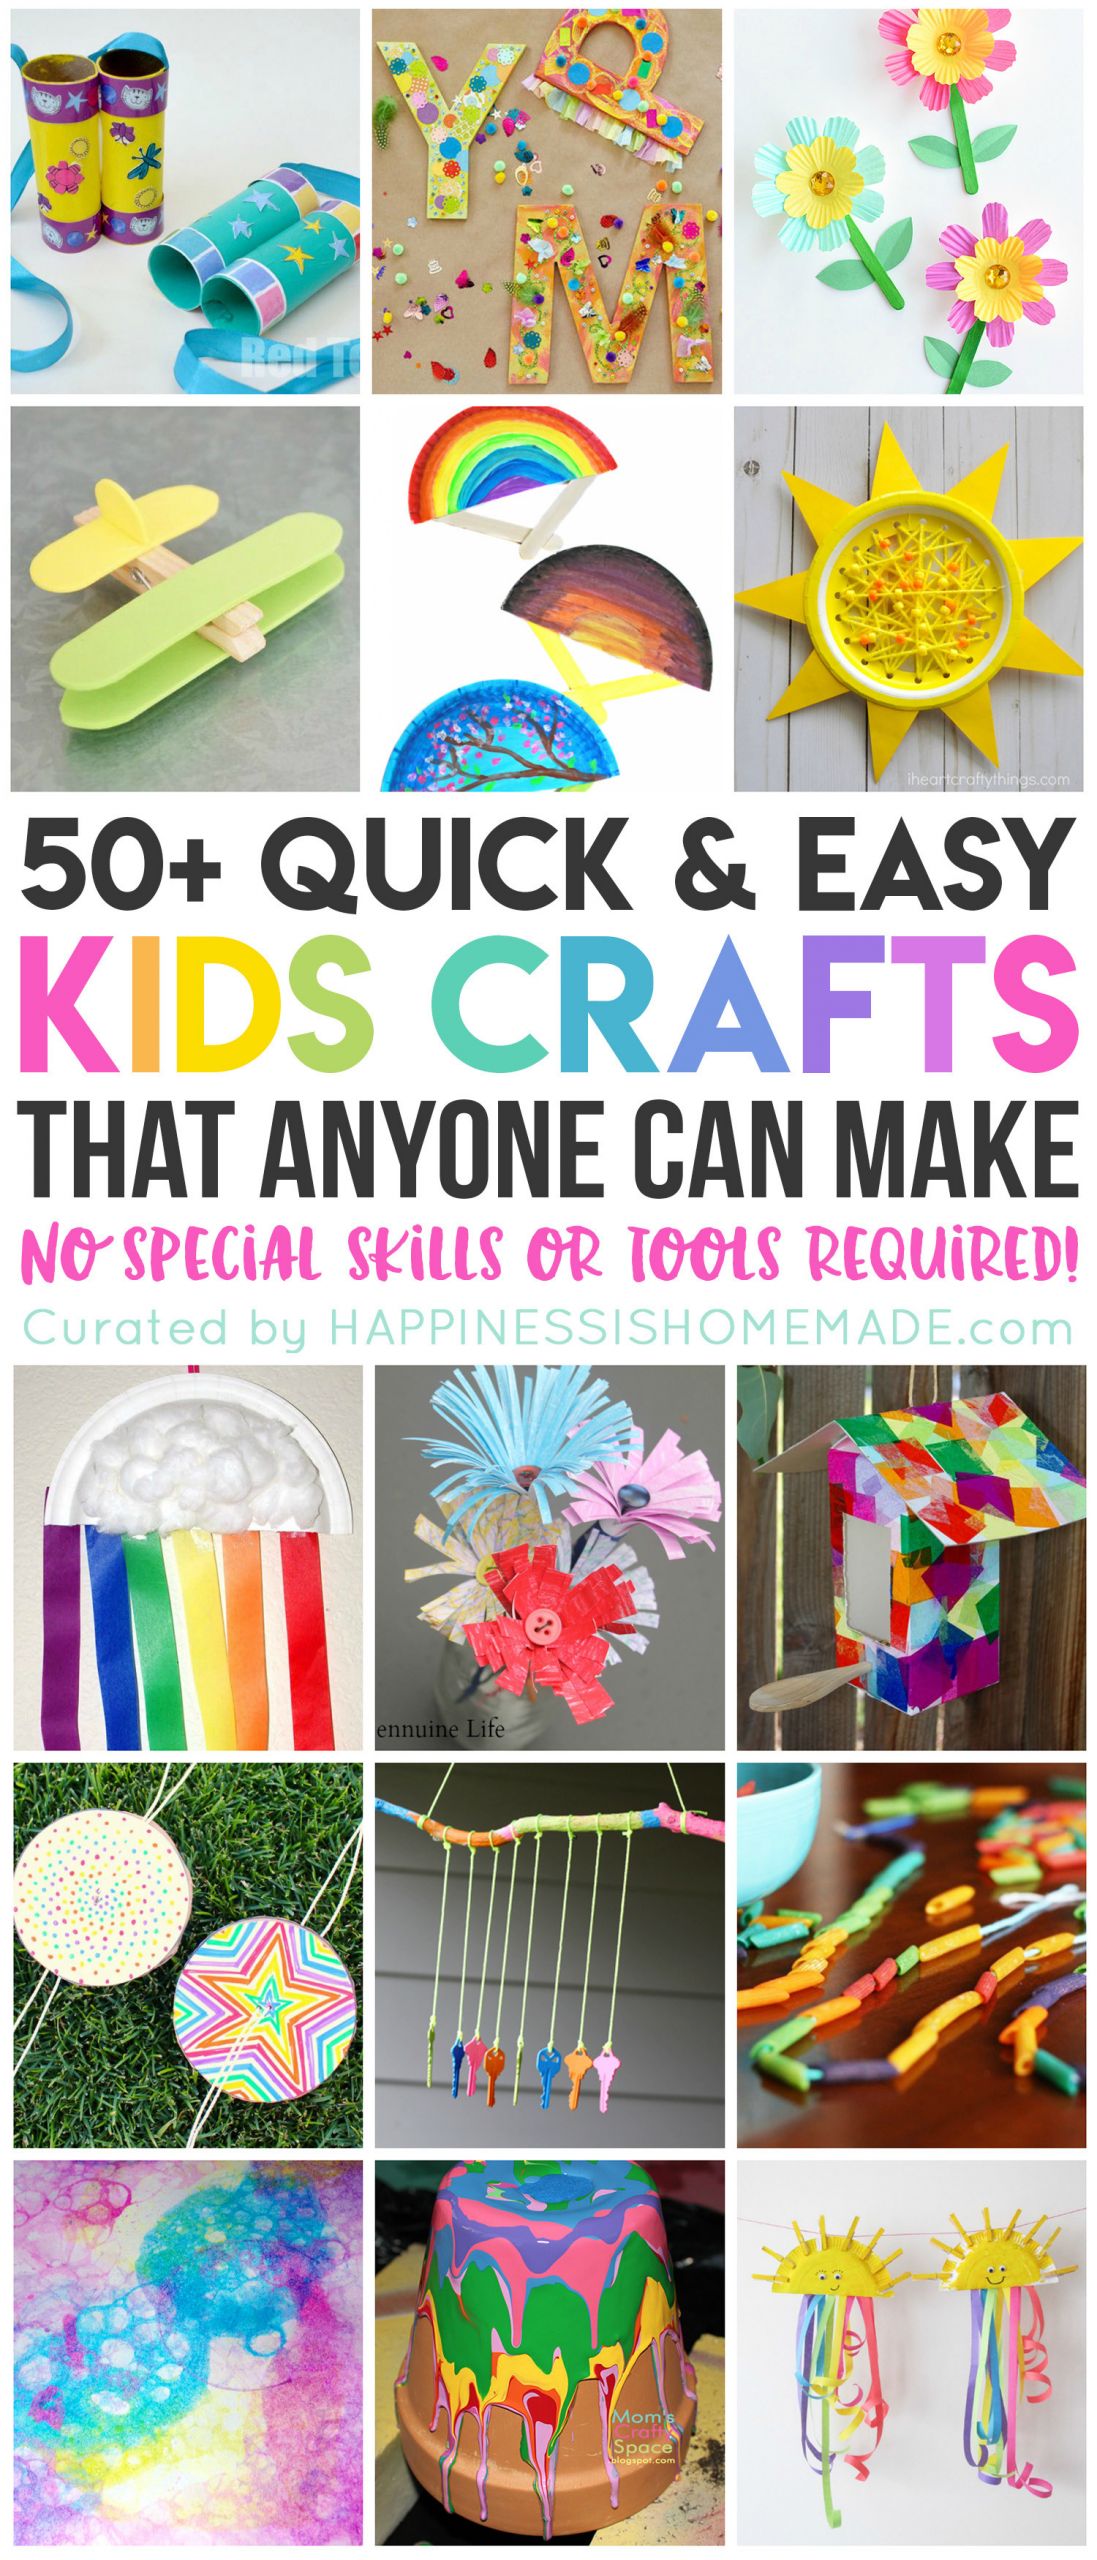 Cool DIY Projects For Kids
 50 Quick & Easy Kids Crafts that ANYONE Can Make